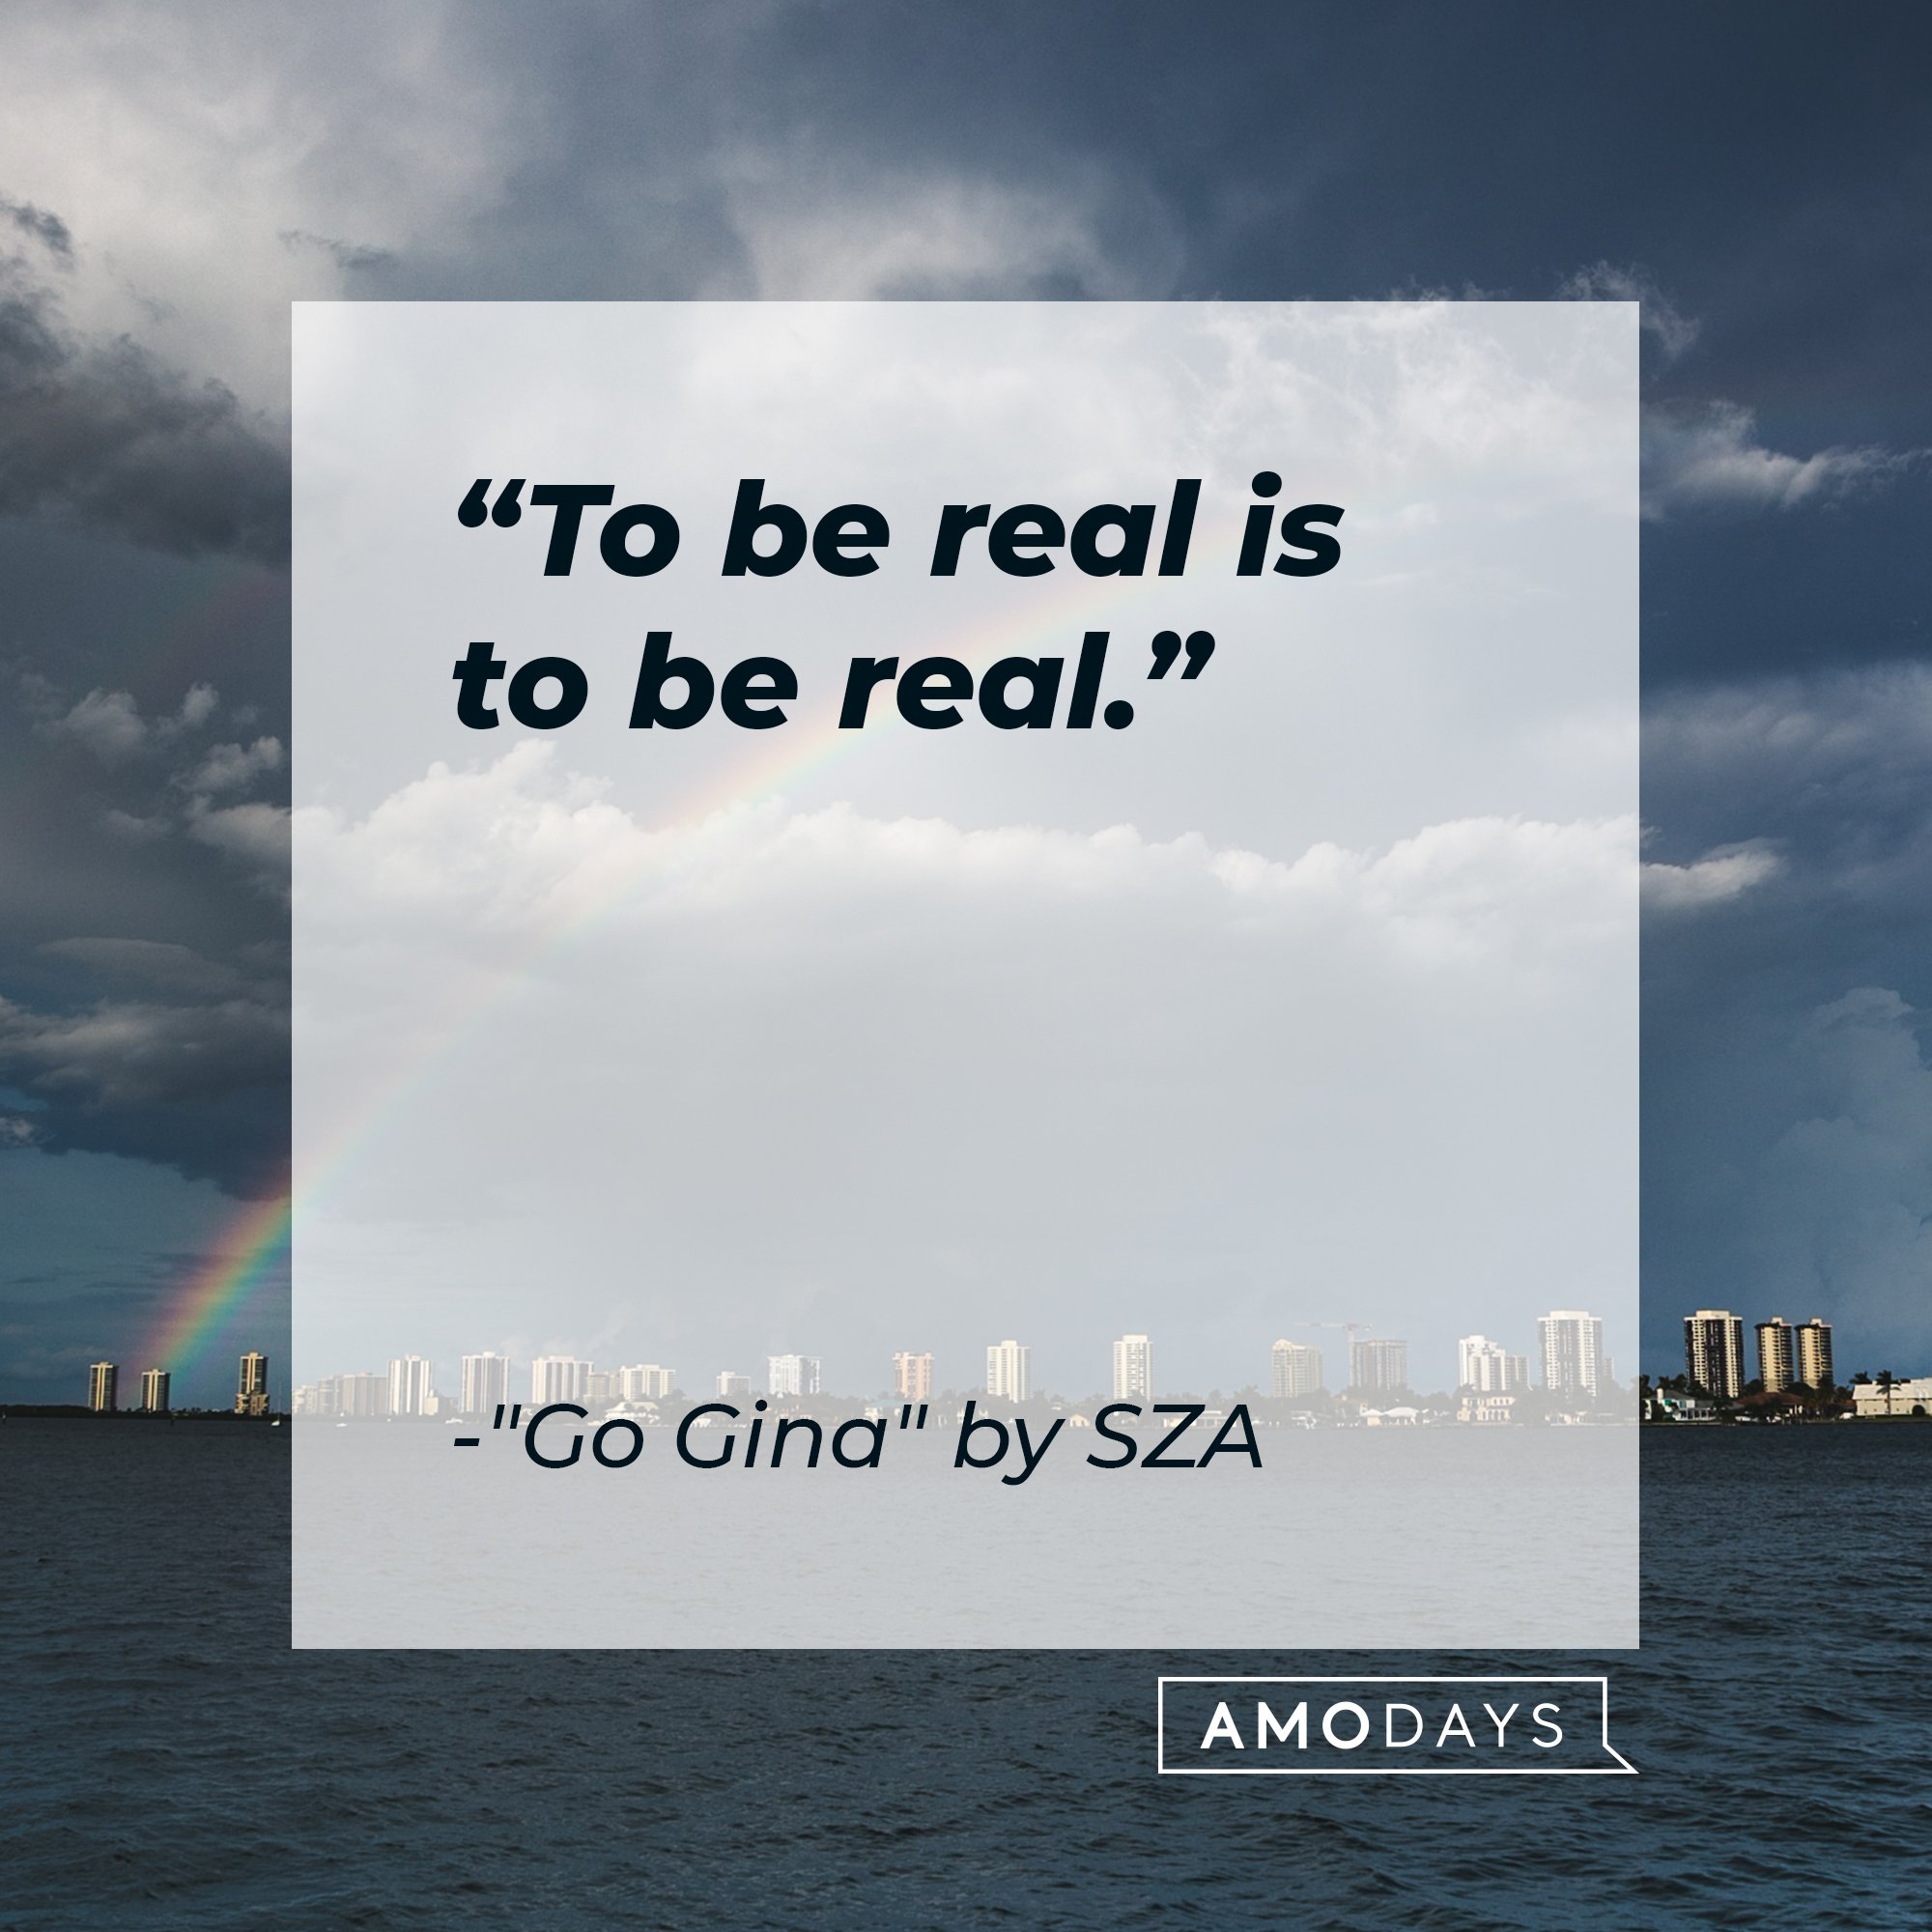 SZA’s quote from "Go Gina" : "To be real is to be real."  | Image: AmoDays